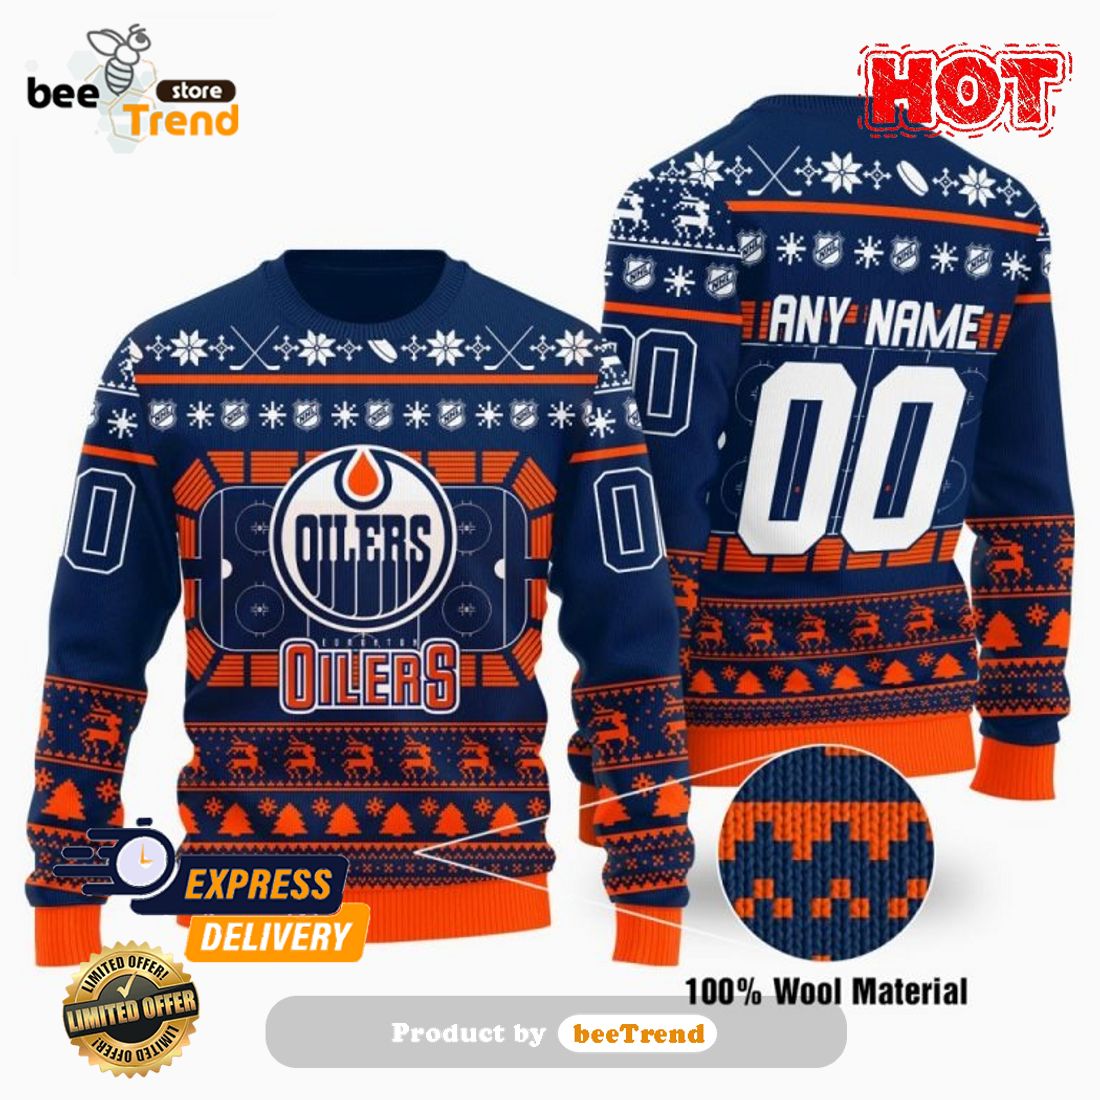 Edmonton Oilers Personalized Name 3D Tshirt Ideal Gift For Men And